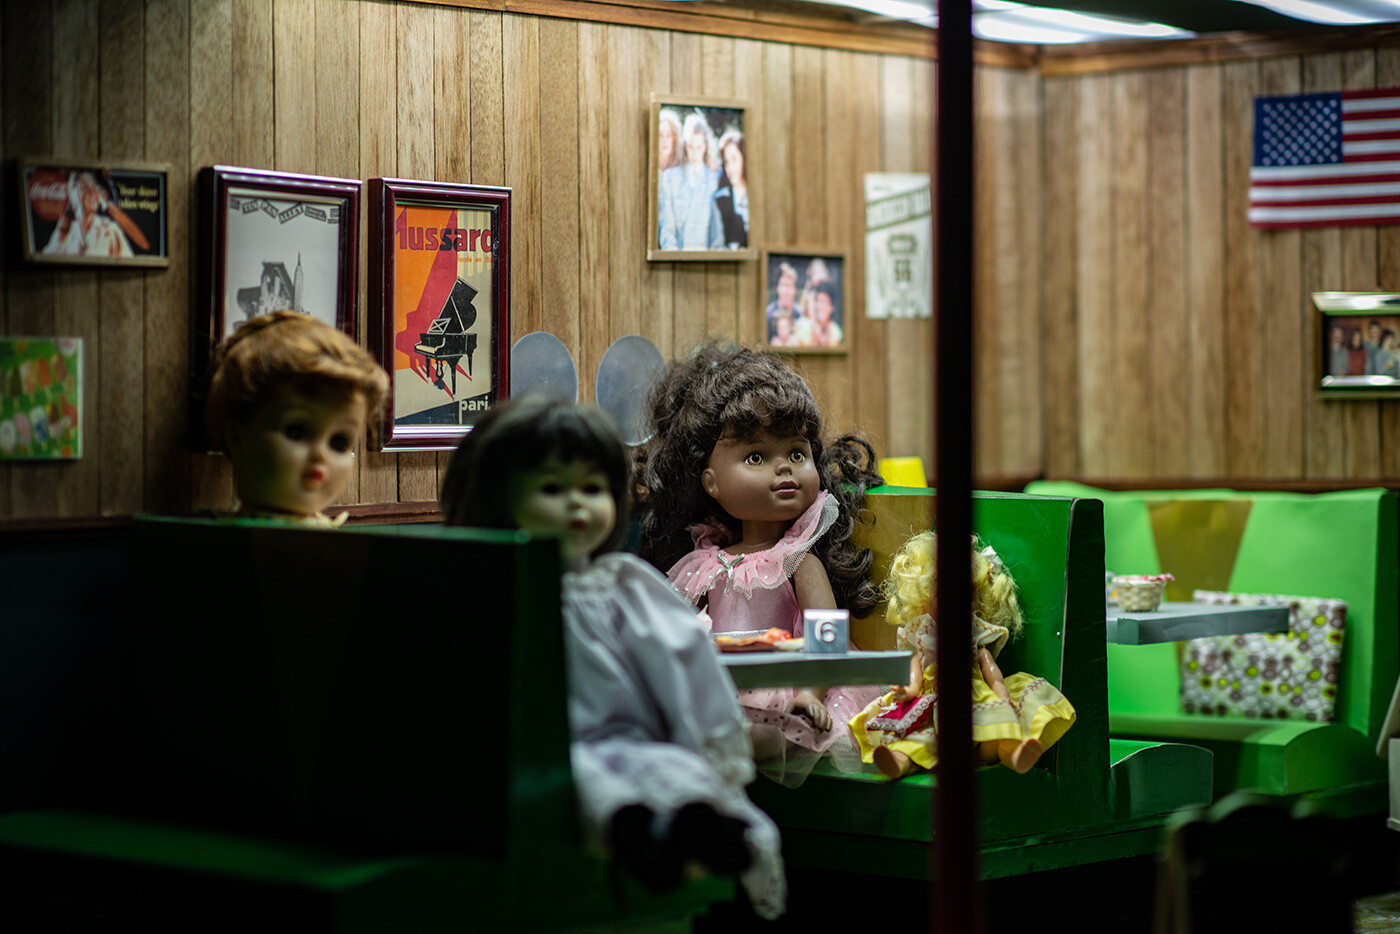 A group of dolls sit at a dimly lit restaurant booth.